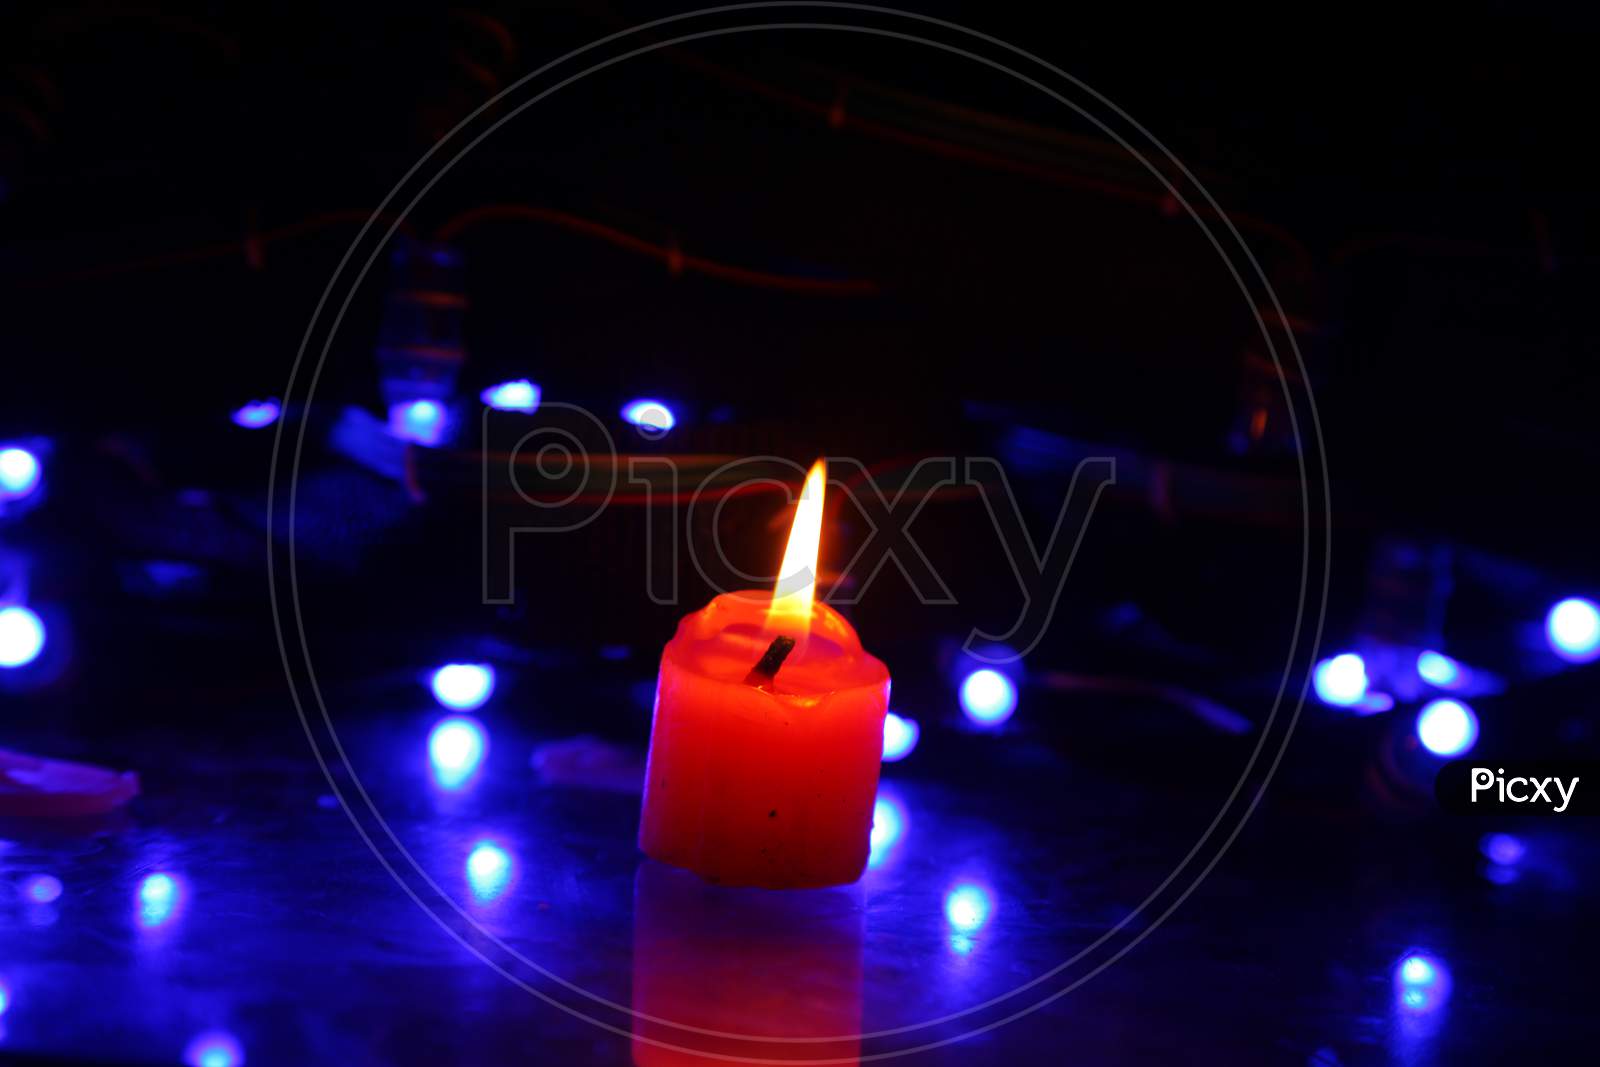 Candle with light